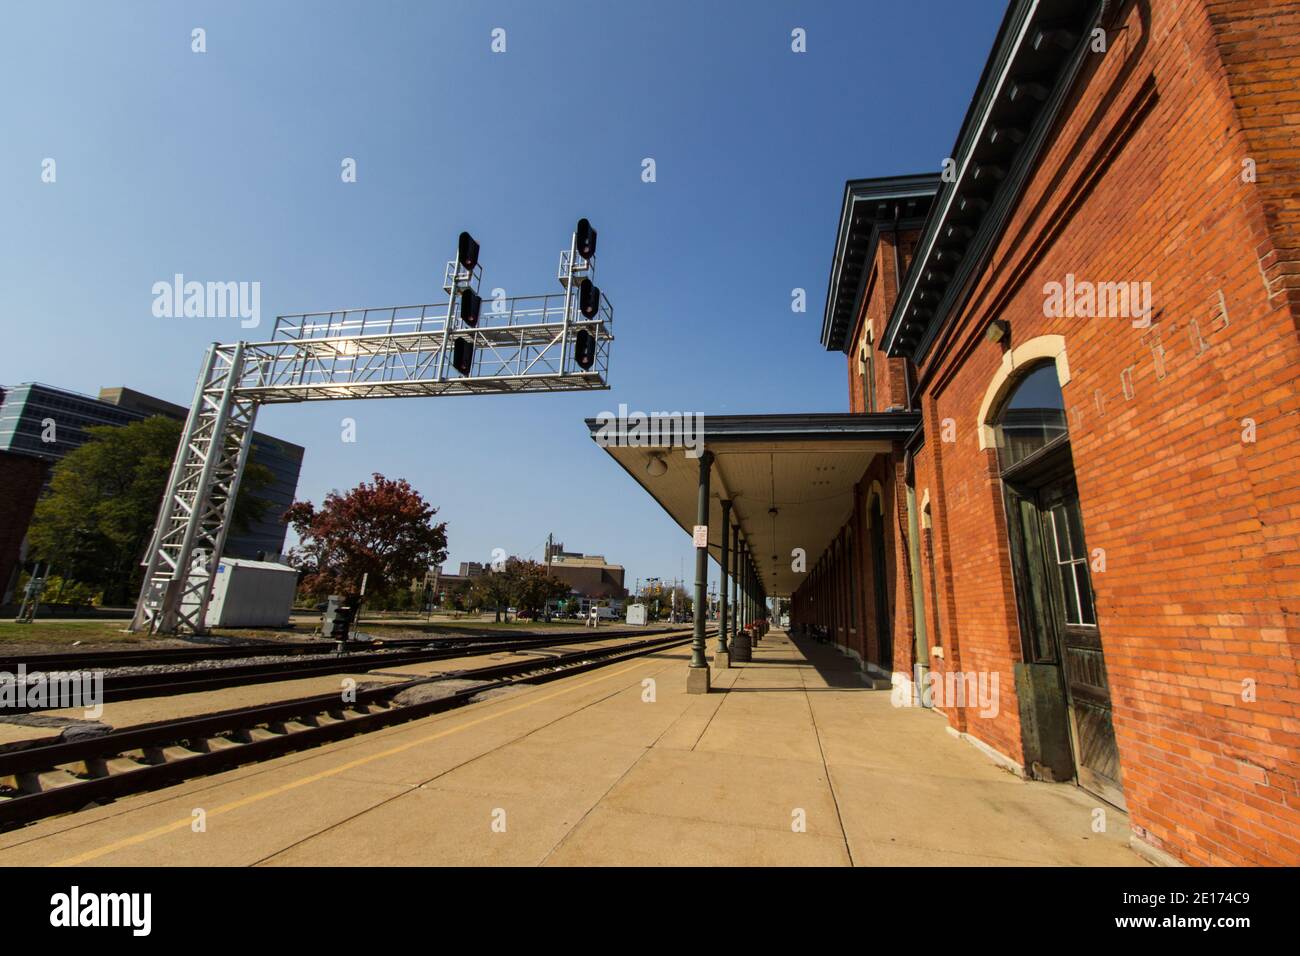 Historic train station depot and tracks with diminishing perspective. Stock Photo